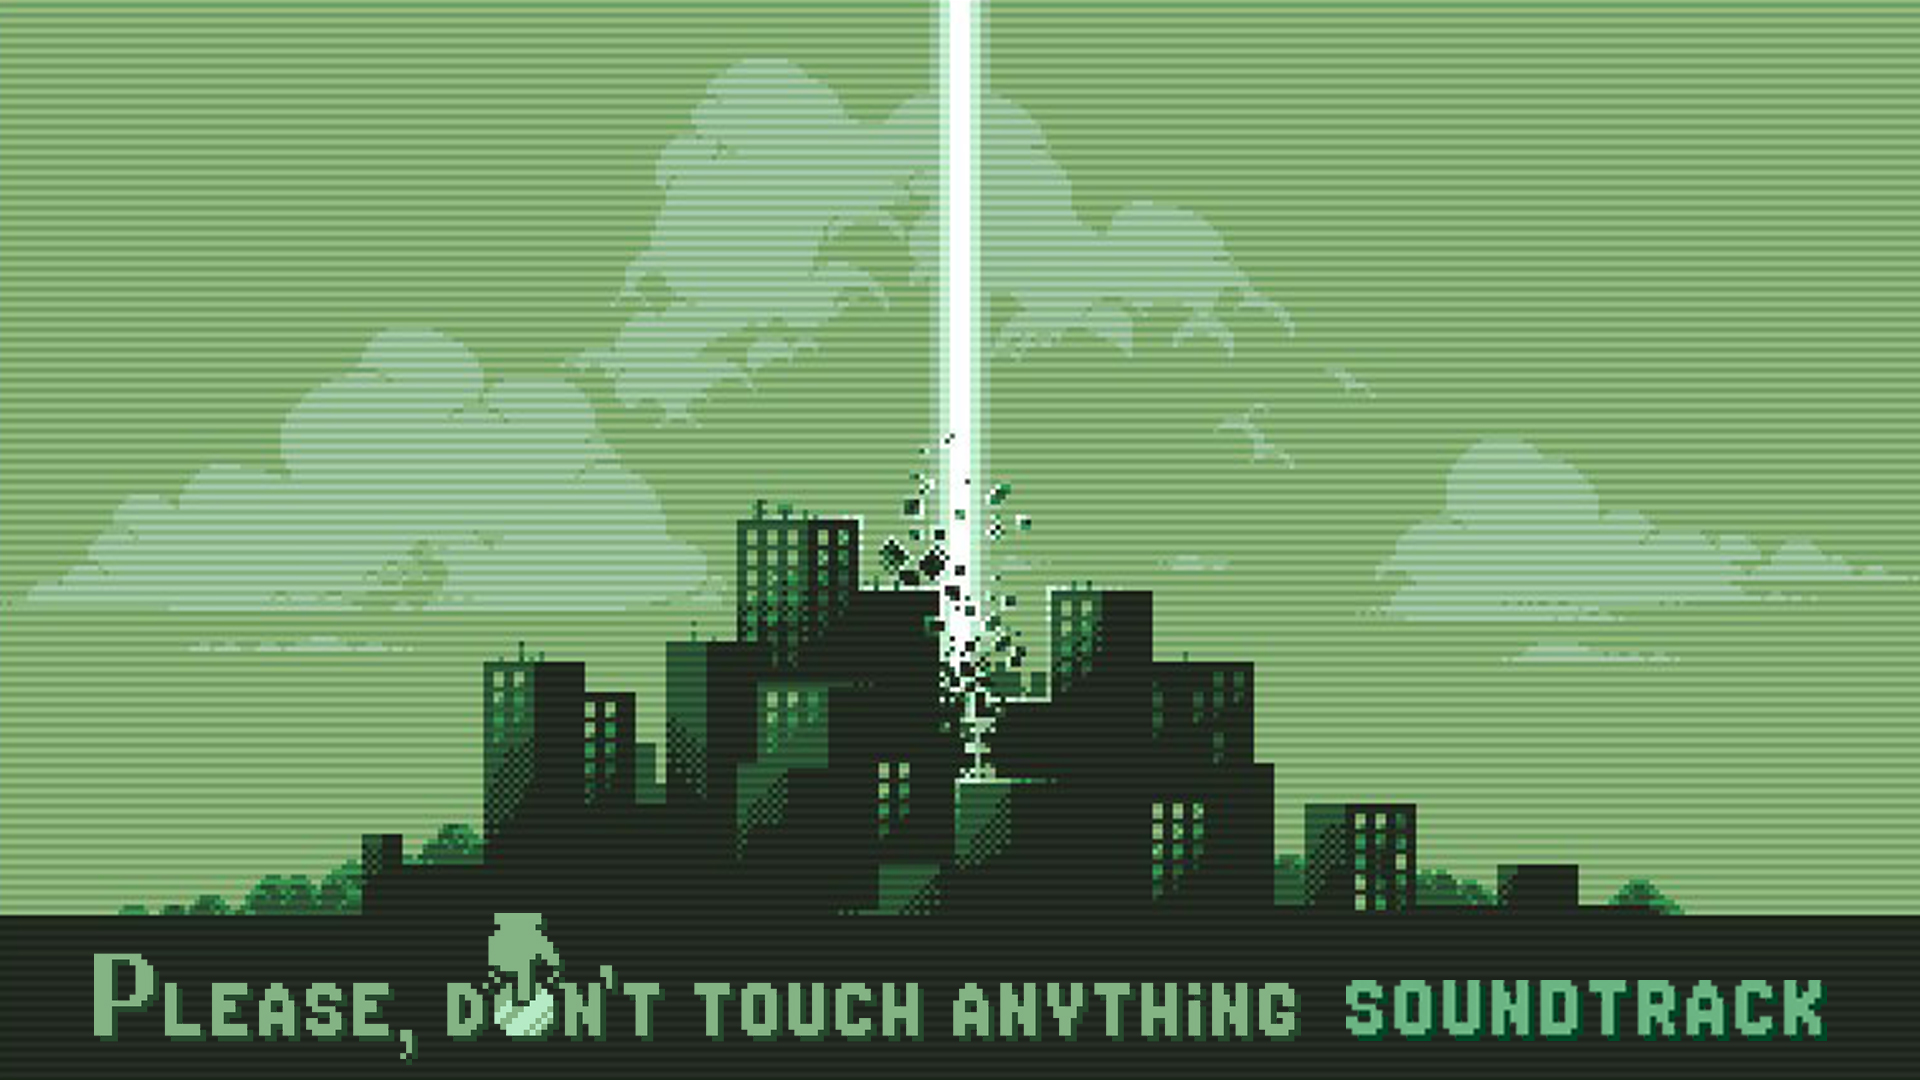 Please, Don't Touch Anything Soundtrack Featured Screenshot #1